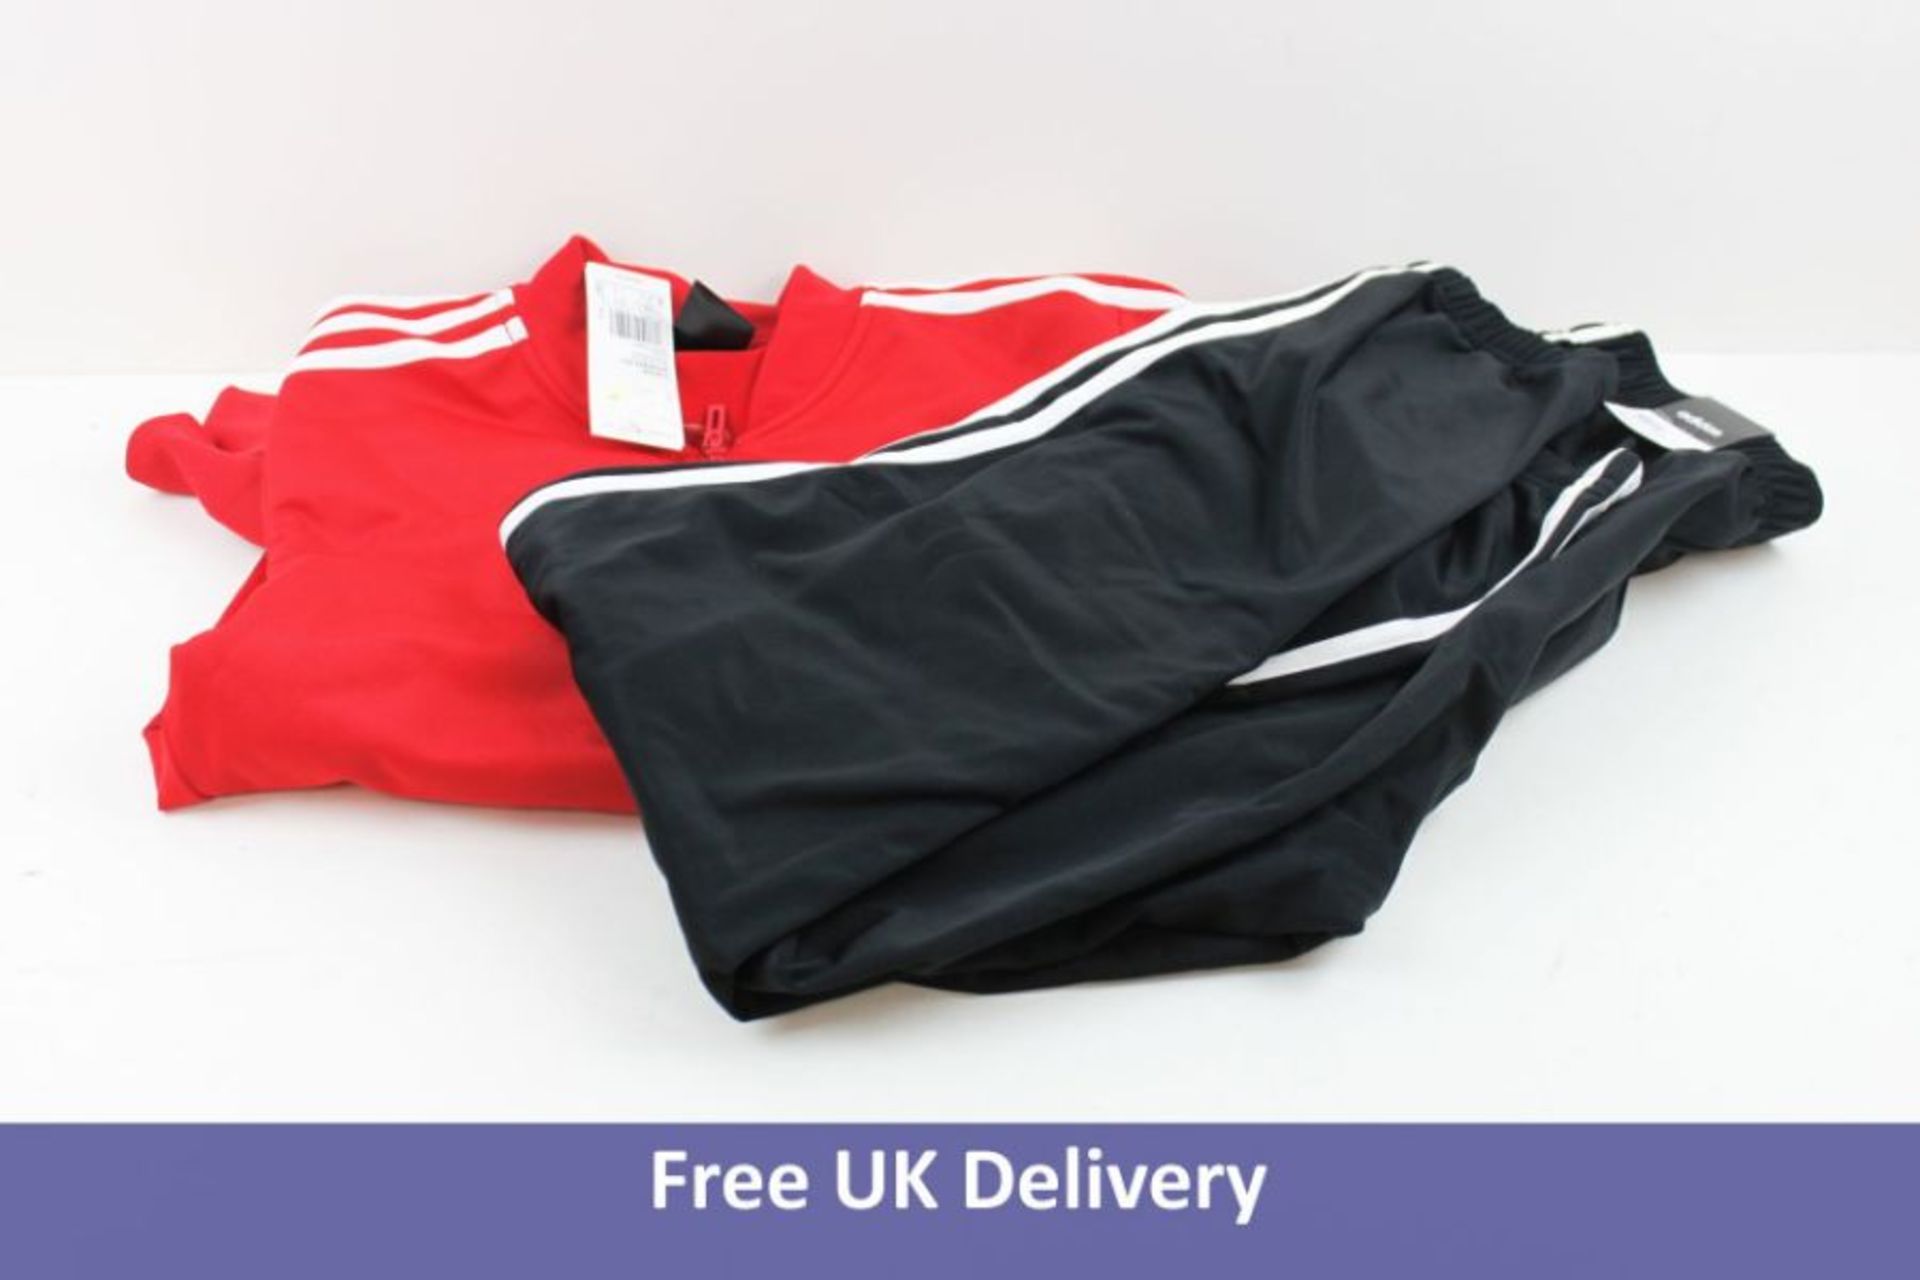 Adidas Men's Tracksuit, Red and Black, Size S